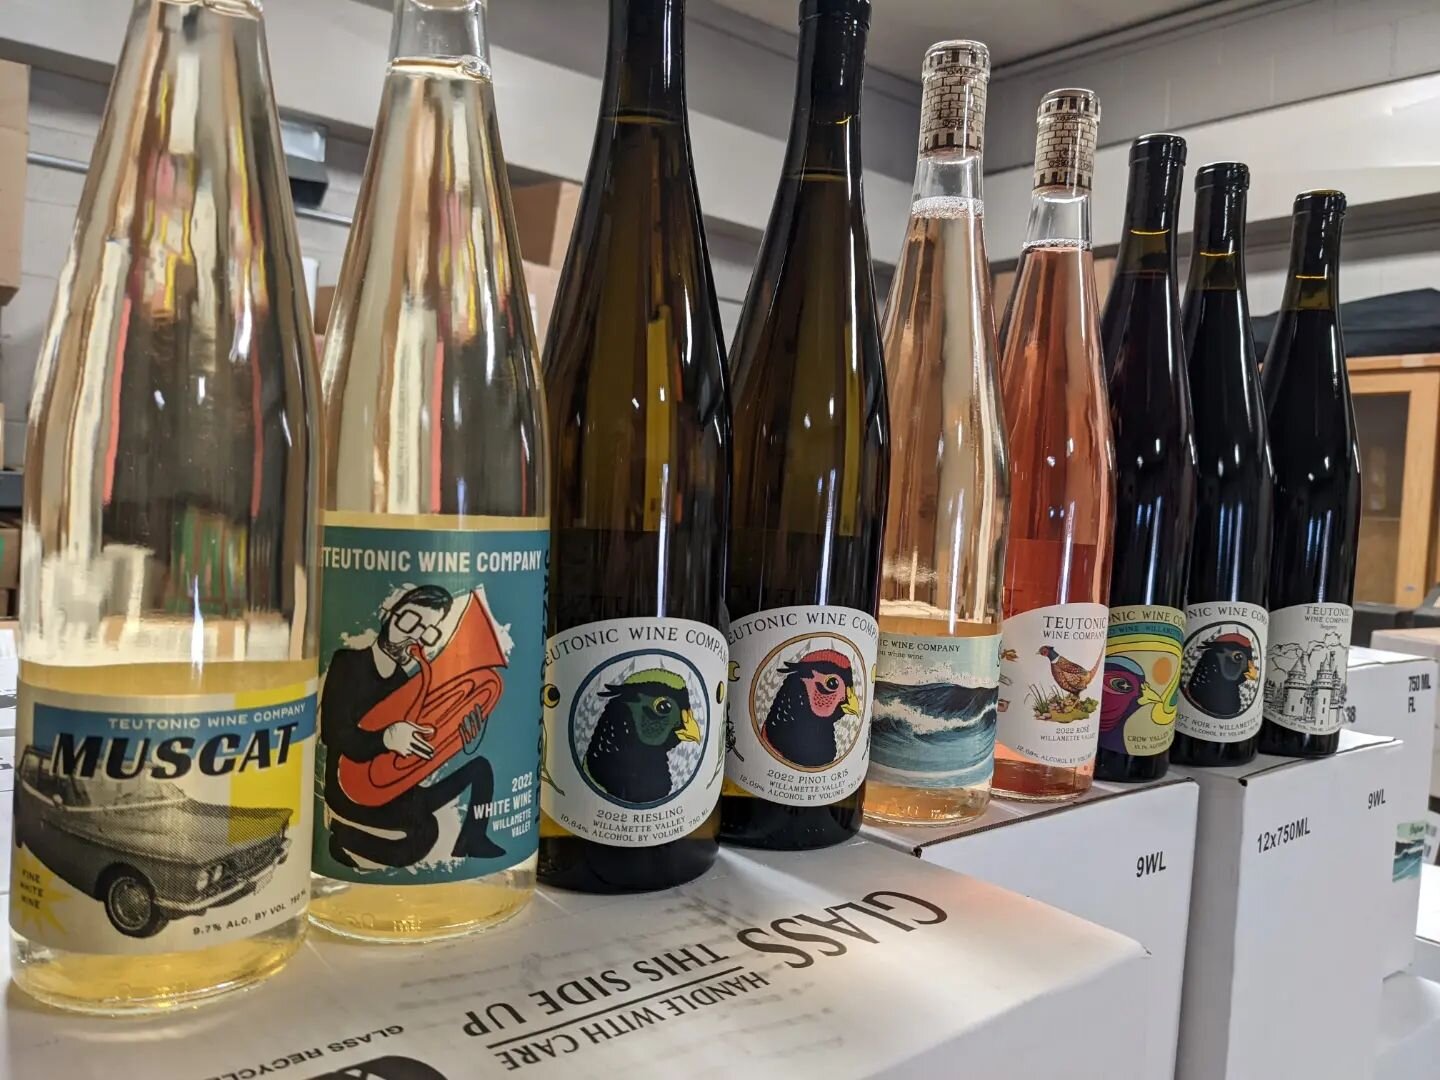 Super excited to announce the addition of Portland OR based Teutonic Wines to the Meadowlark Provisions portfolio! Inspired by the continental wines of the Mosel and Alsace, they have a house style that is moderate in alcohol, higher acidity, and in 